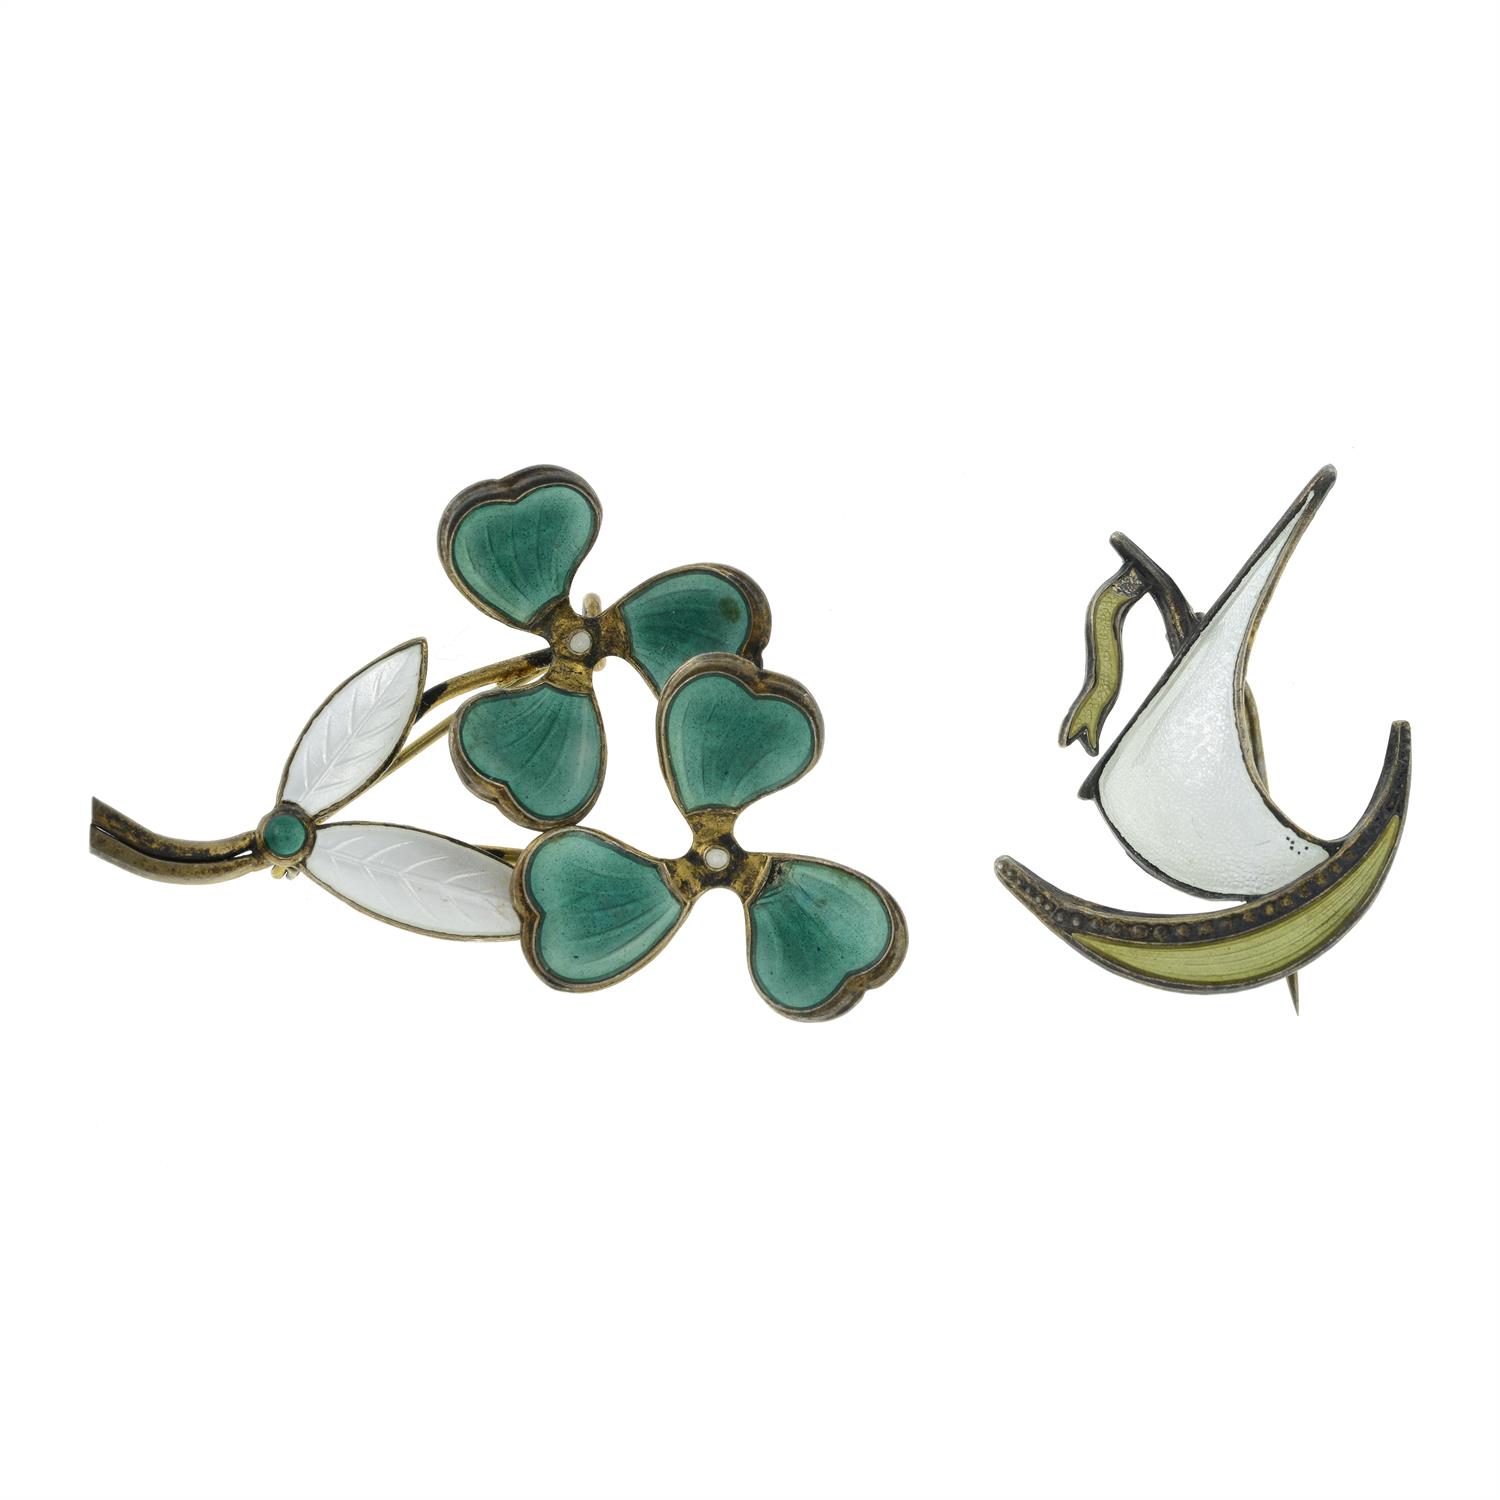 Two early 20th century silver and enamel brooches.